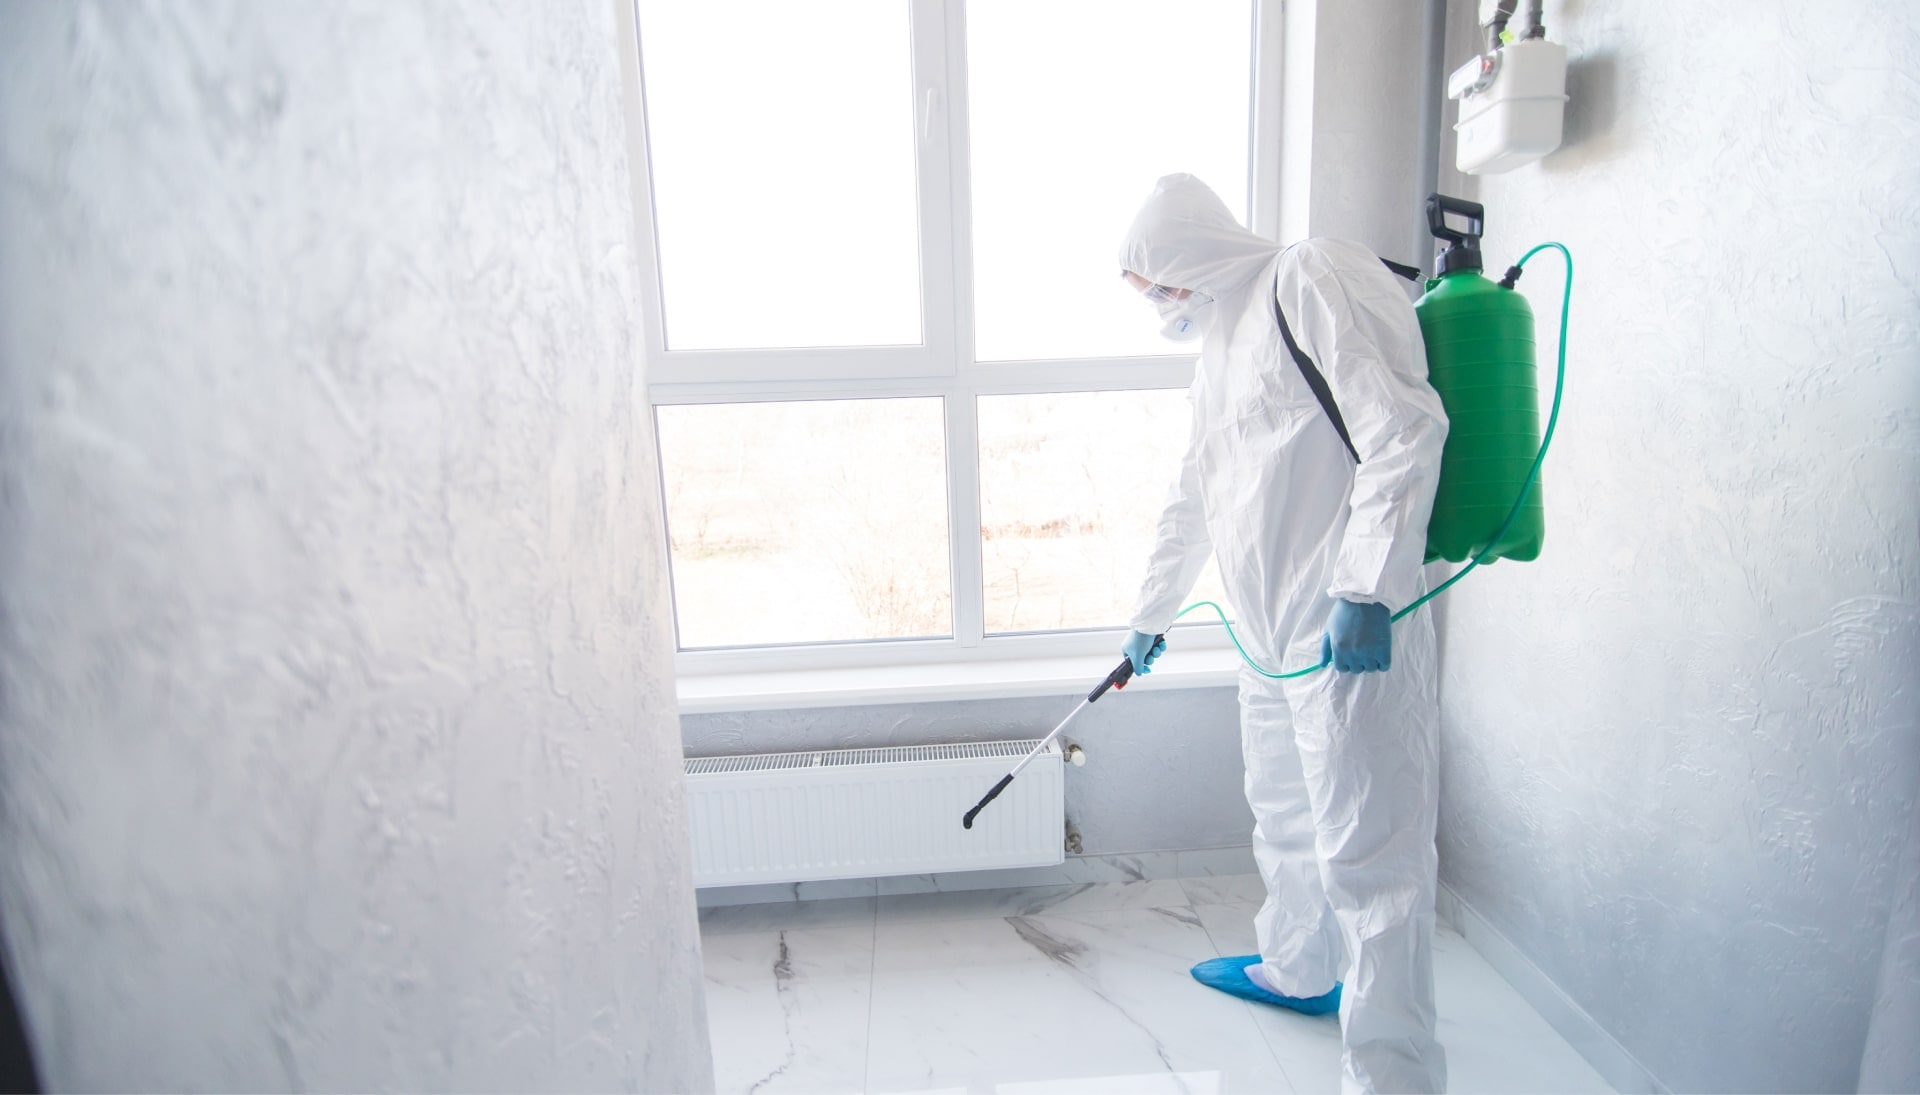 We provide the highest-quality mold inspection, testing, and removal services in the Mesa, Arizona area.